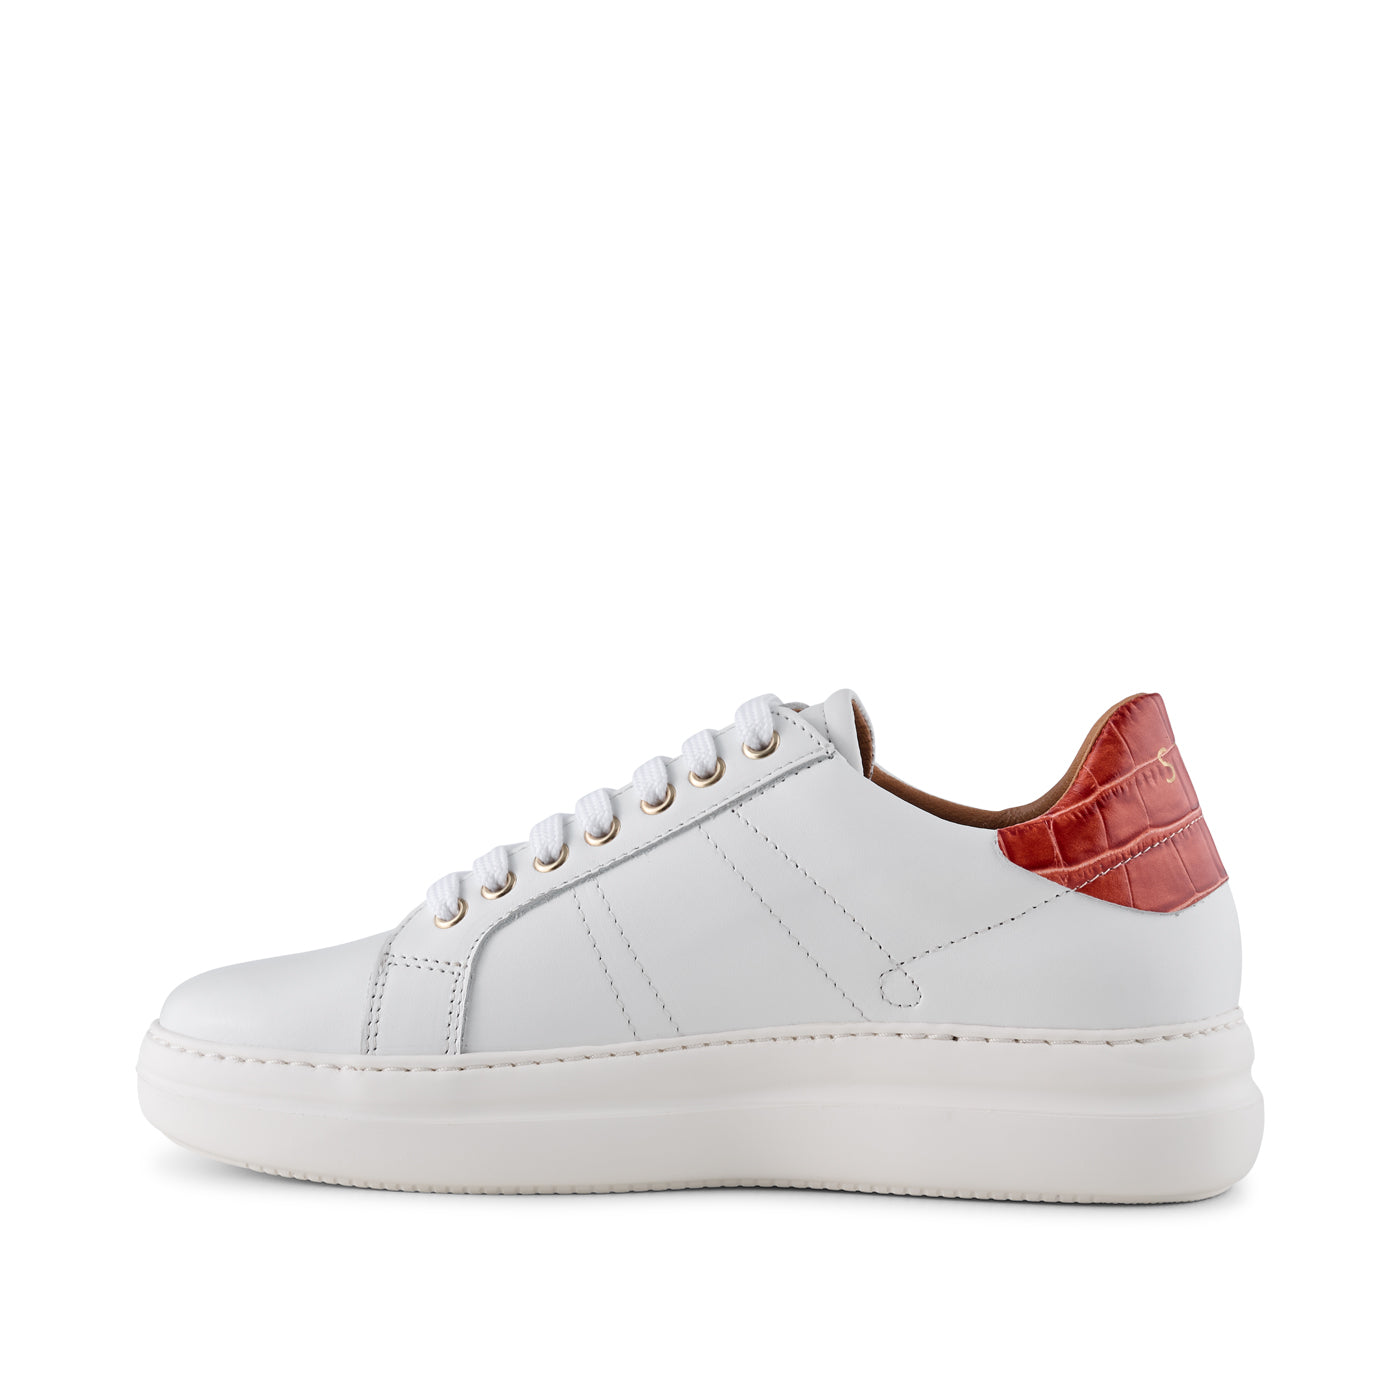 SHOE THE BEAR WOMENS Vinca sneaker leather Sneakers 128 WHITE/ RED